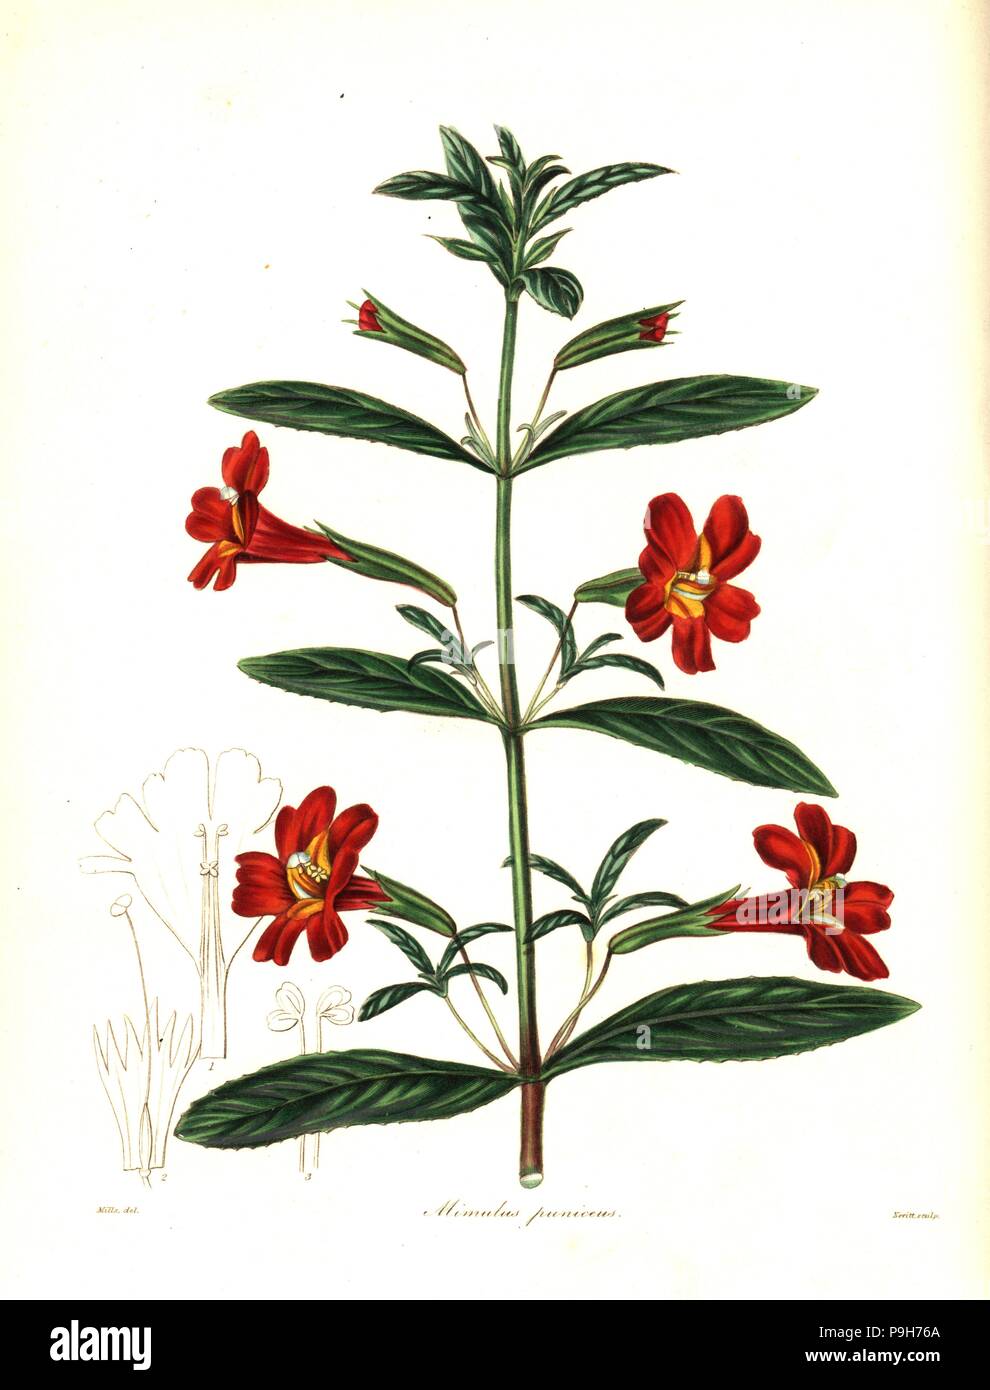 Red monkey flower or scarlet mimulus, Mimulus puniceus. Handcoloured copperplate engraving by Smith after a botanical illustration by Mills from Benjamin Maund and the Rev. John Stevens Henslow's The Botanist, London, 1836. Stock Photo